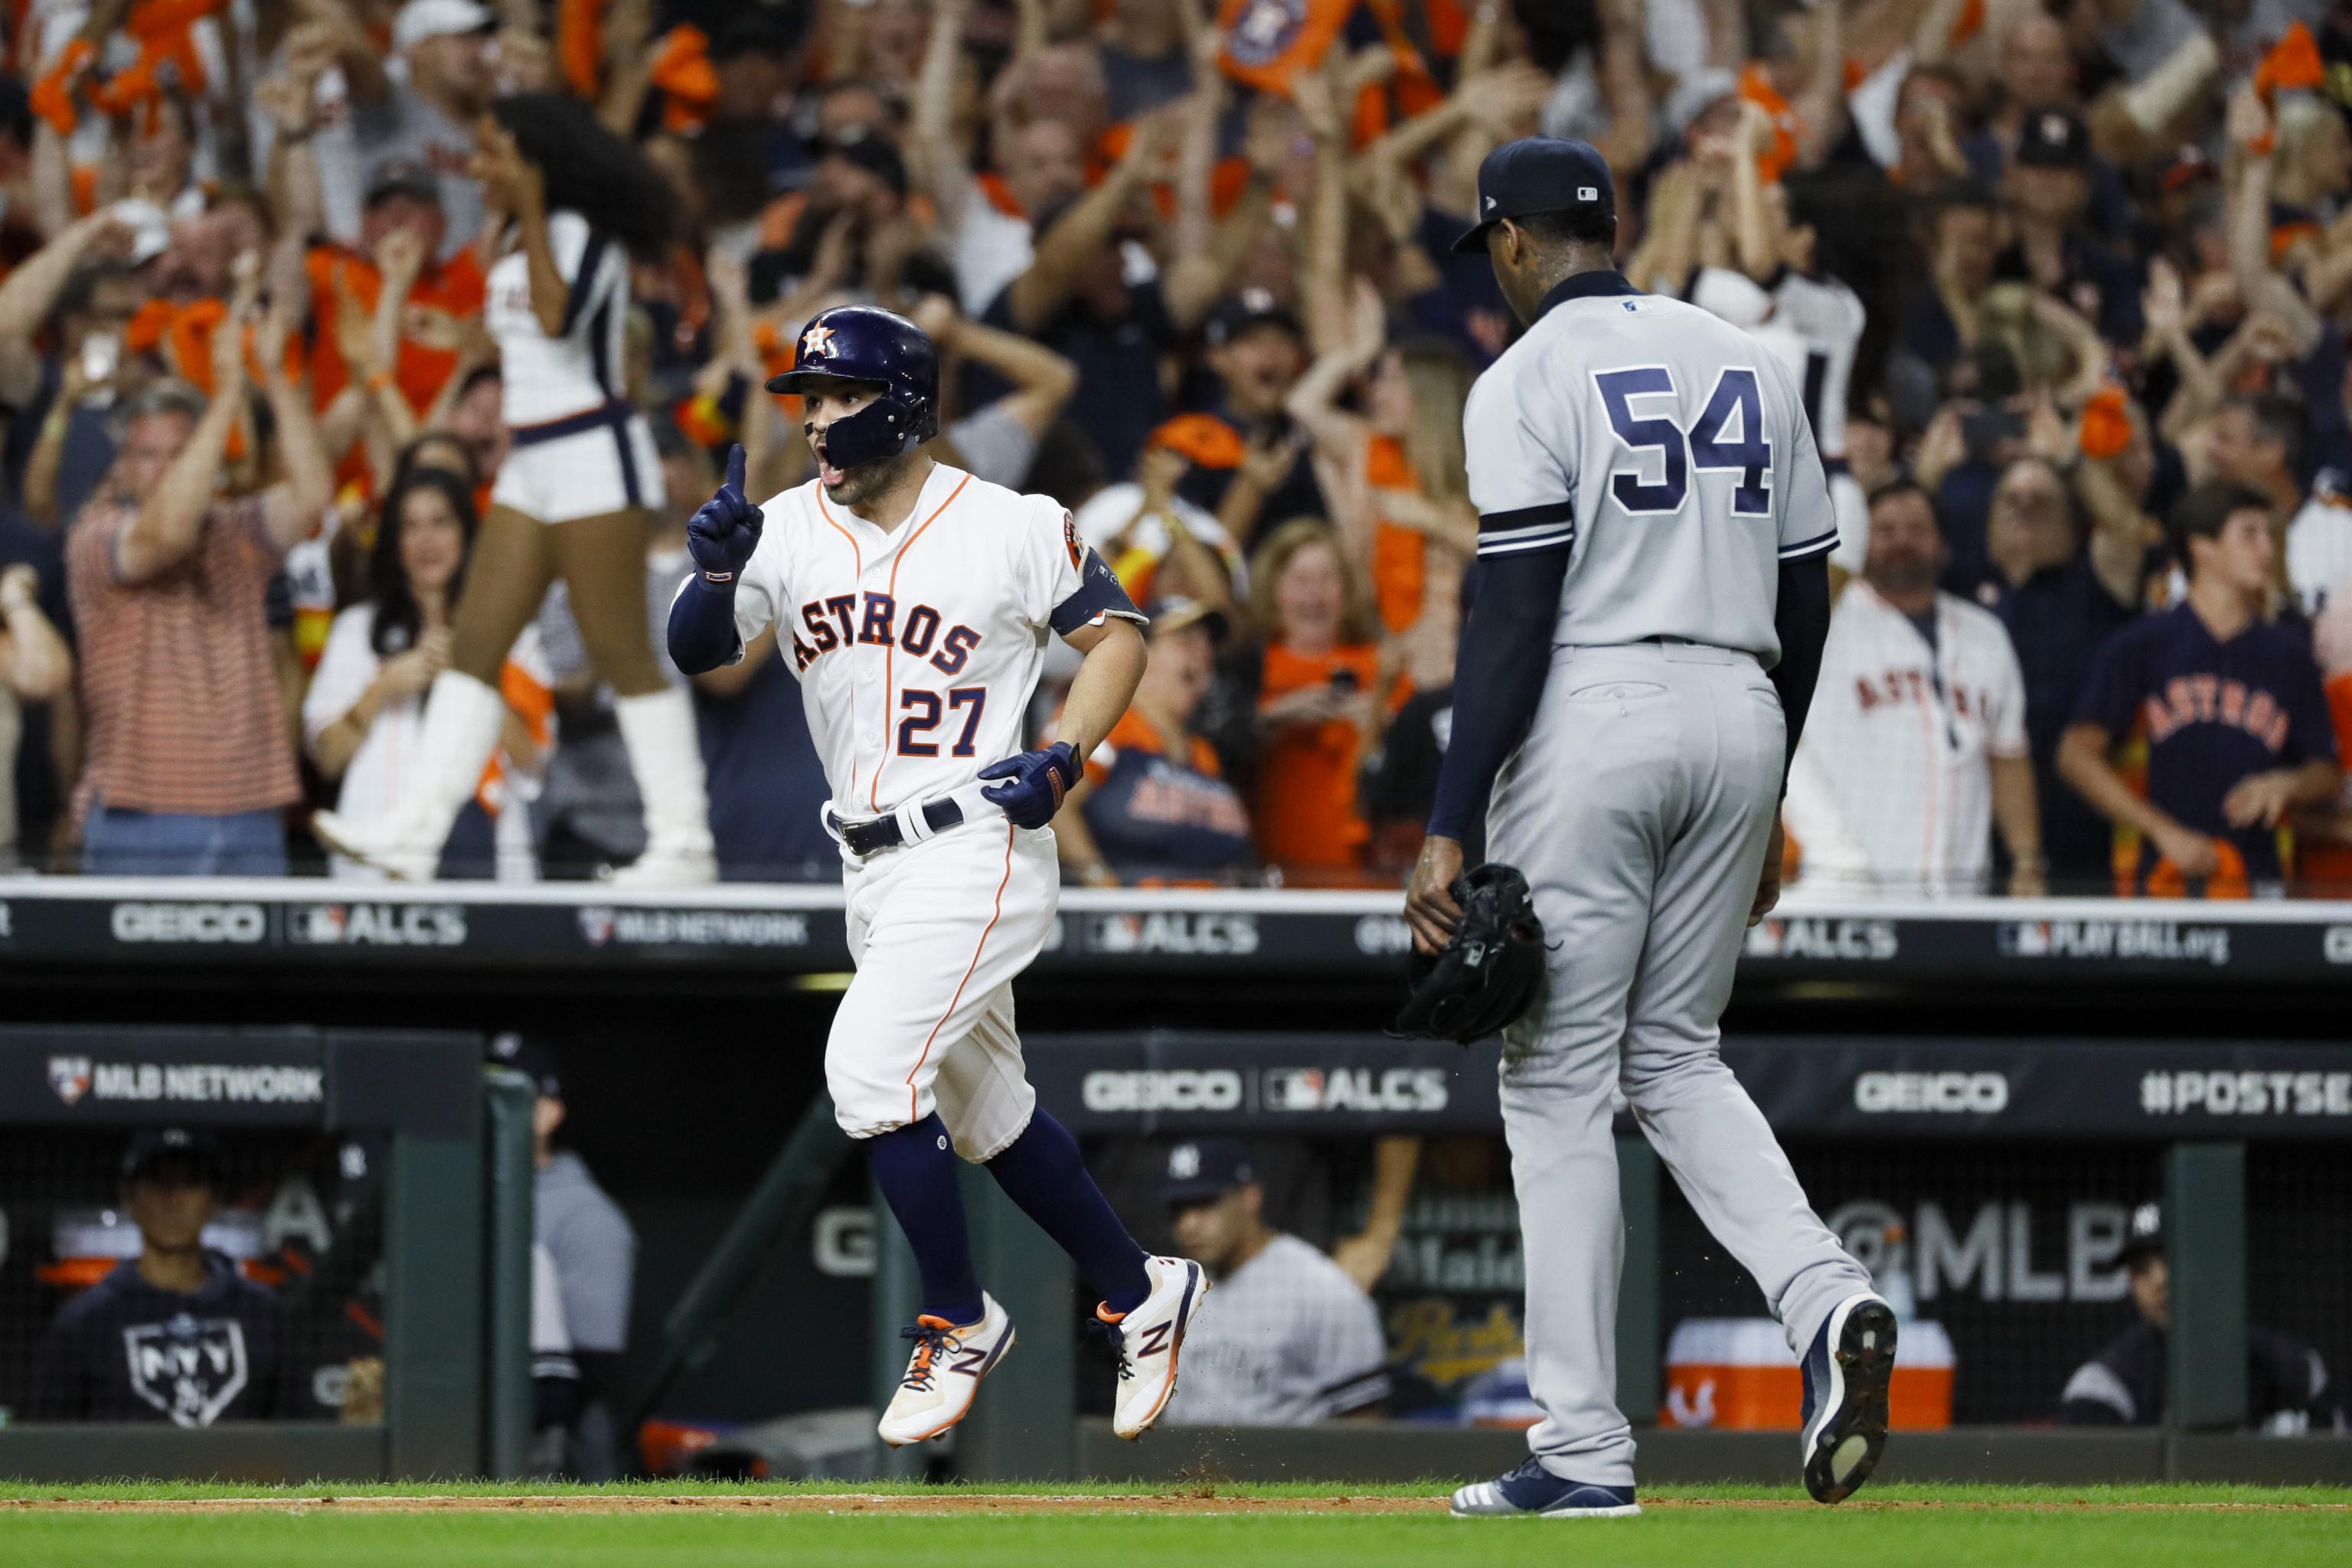 Astros' Jose Altuve gets jersey ripped off after game-winning